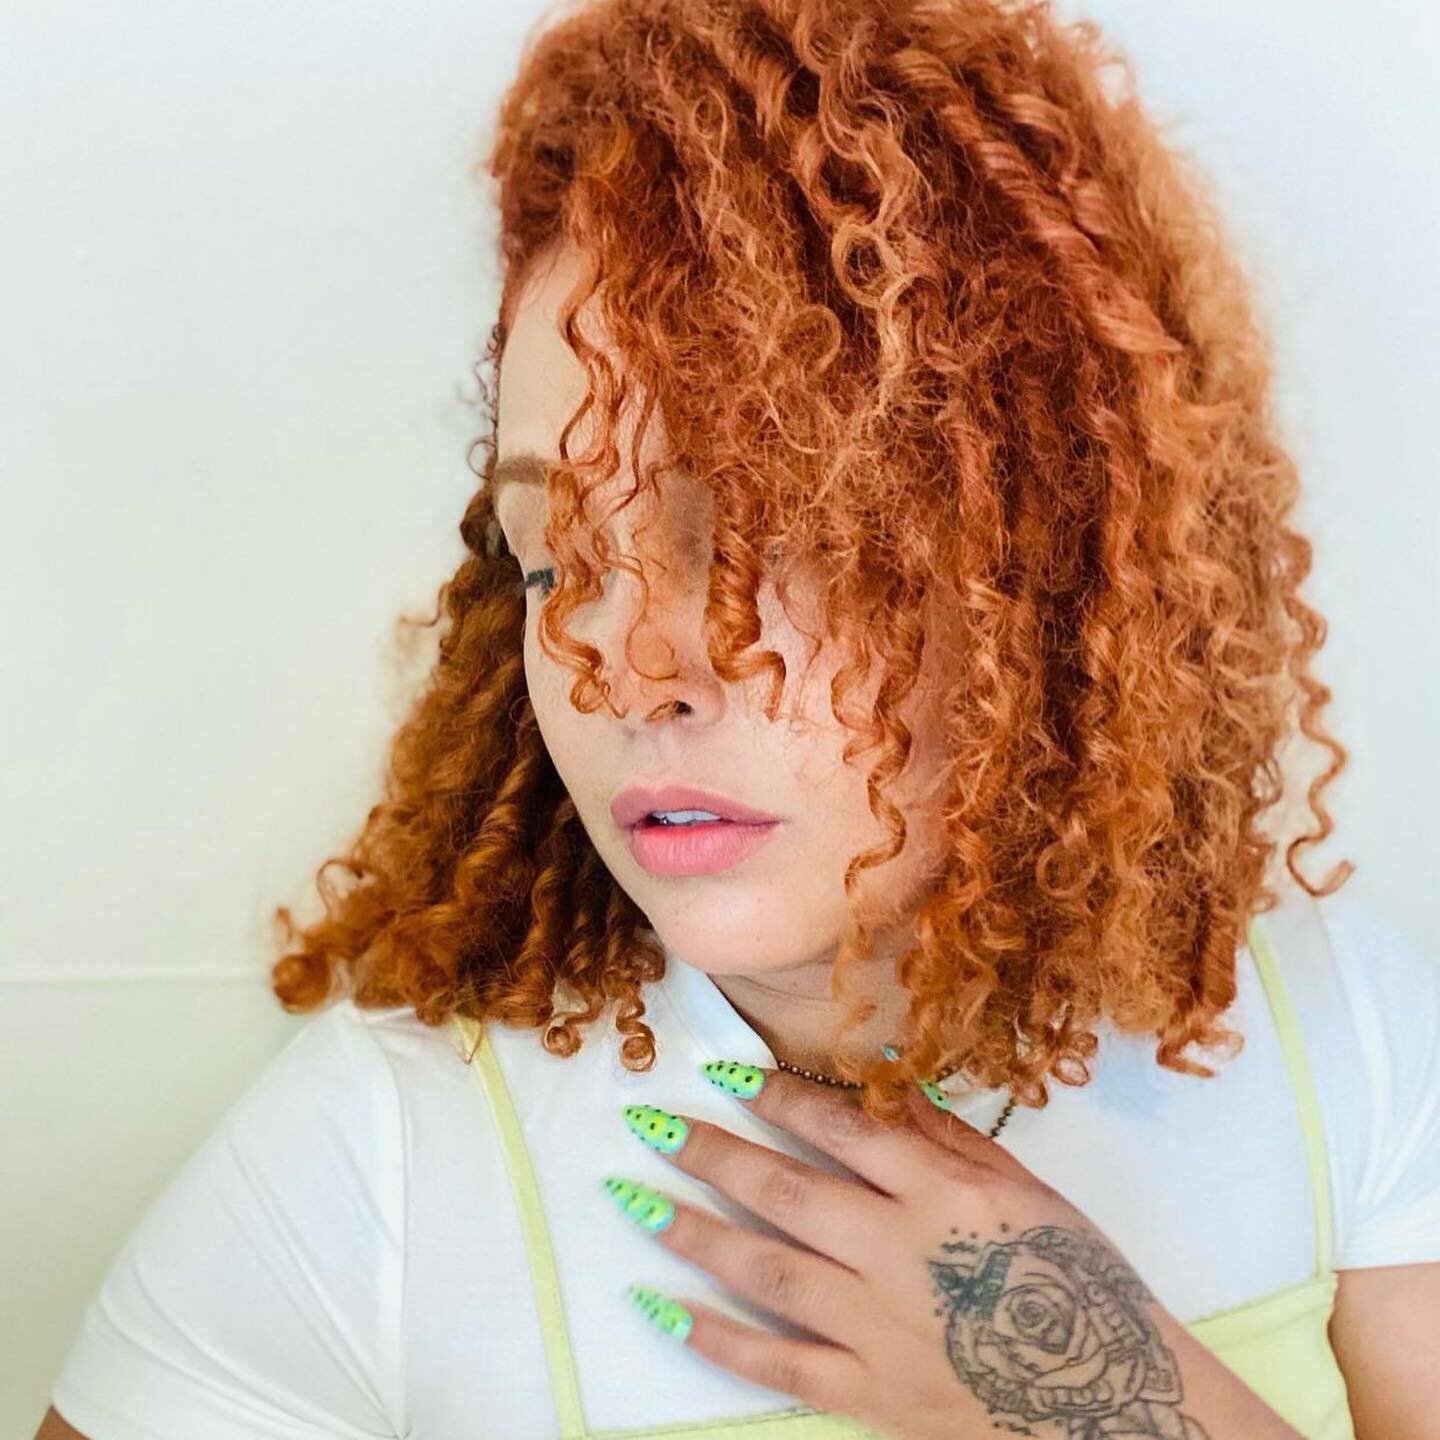 Obsessed with this transformation from @armanzand.hairmakeup 🥰🥰 
&bull;
&bull;
#martinezsamuelsalon #Behindthechair #curlyhair